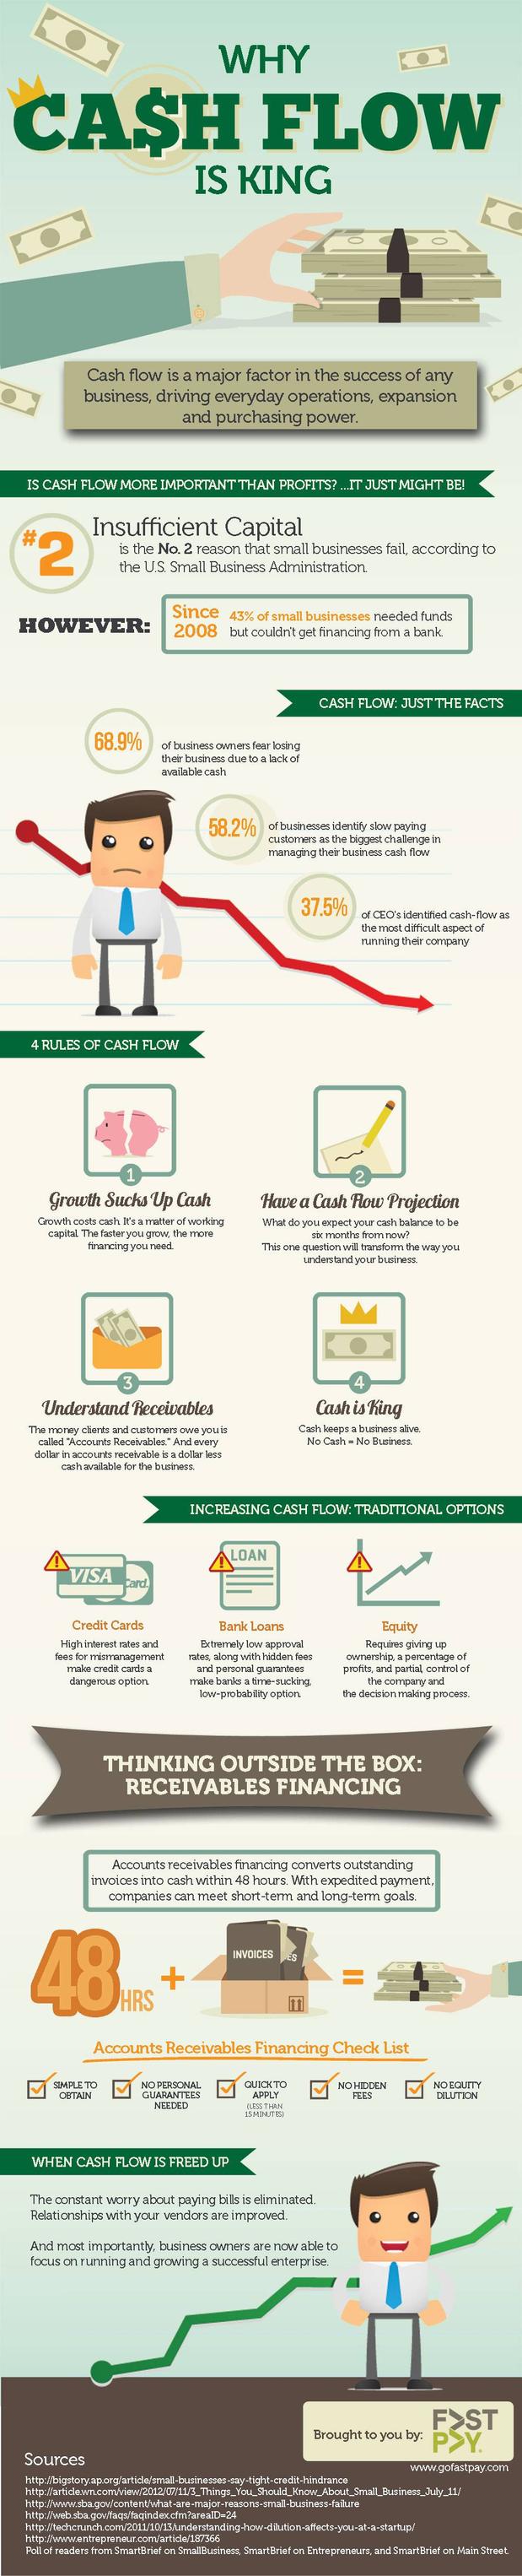 Why Cash Flow Management is the King?